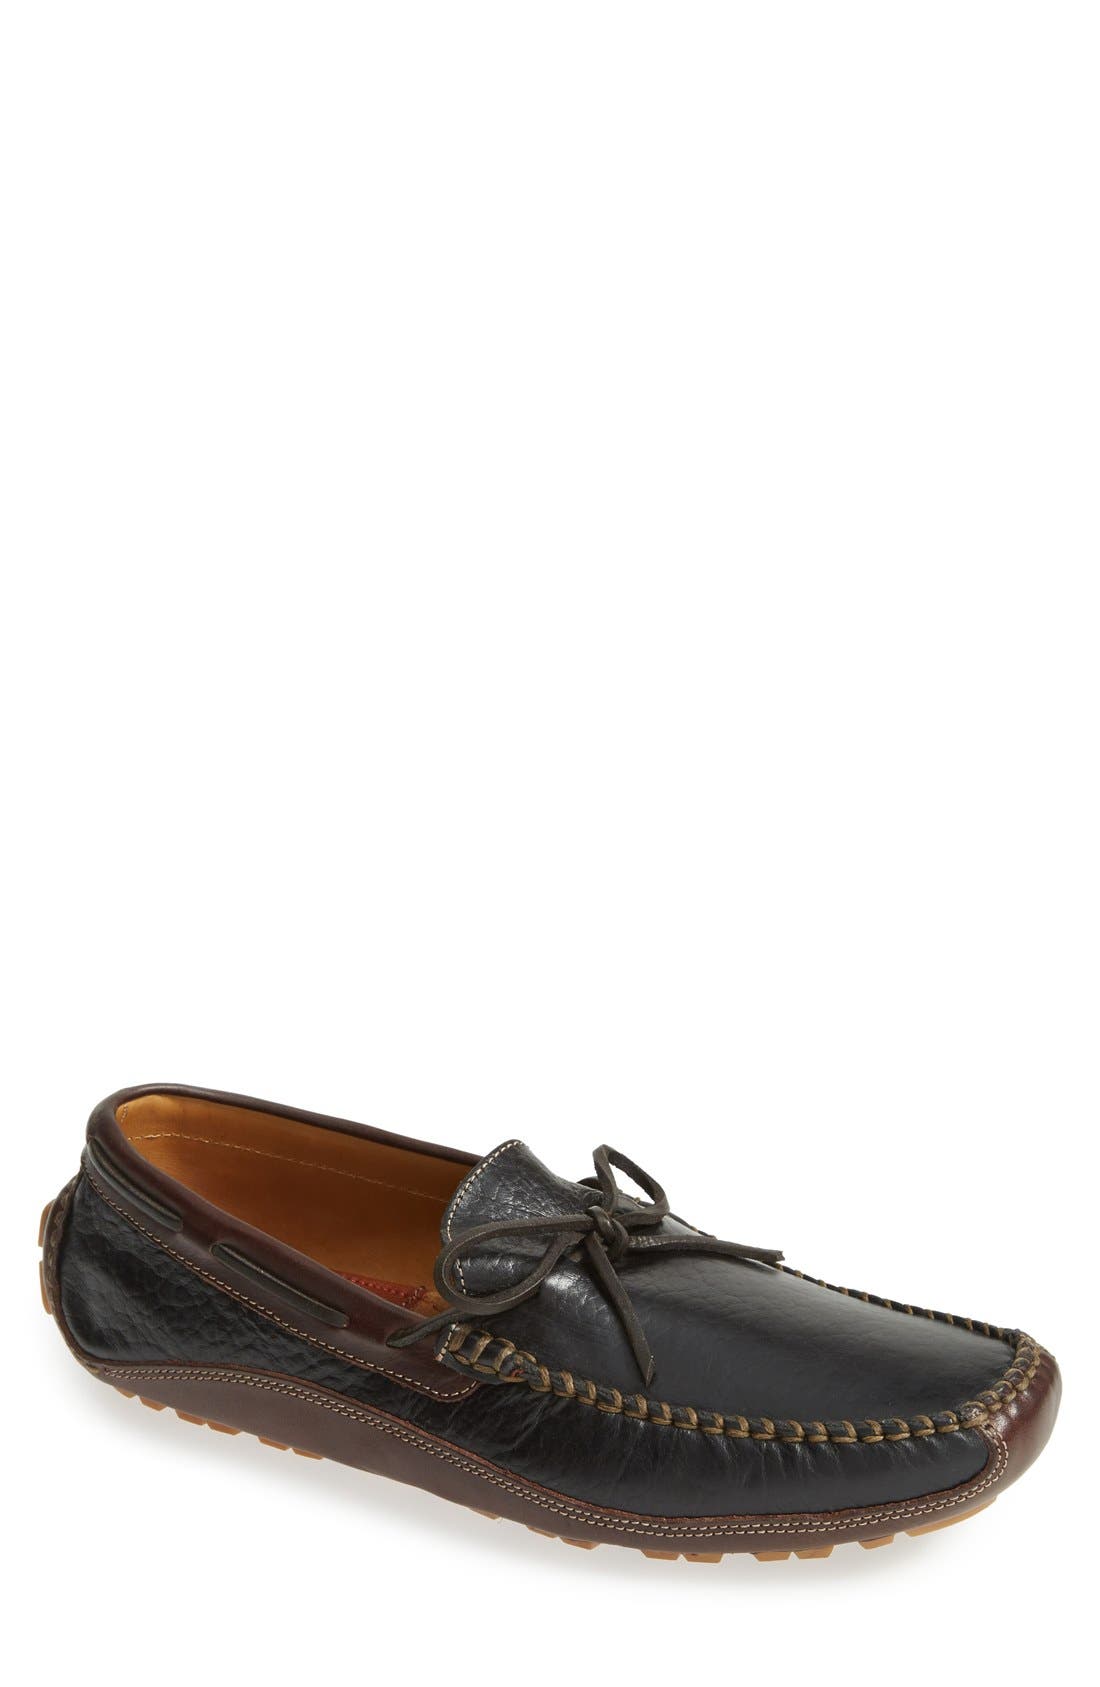 trask drake leather driving shoe